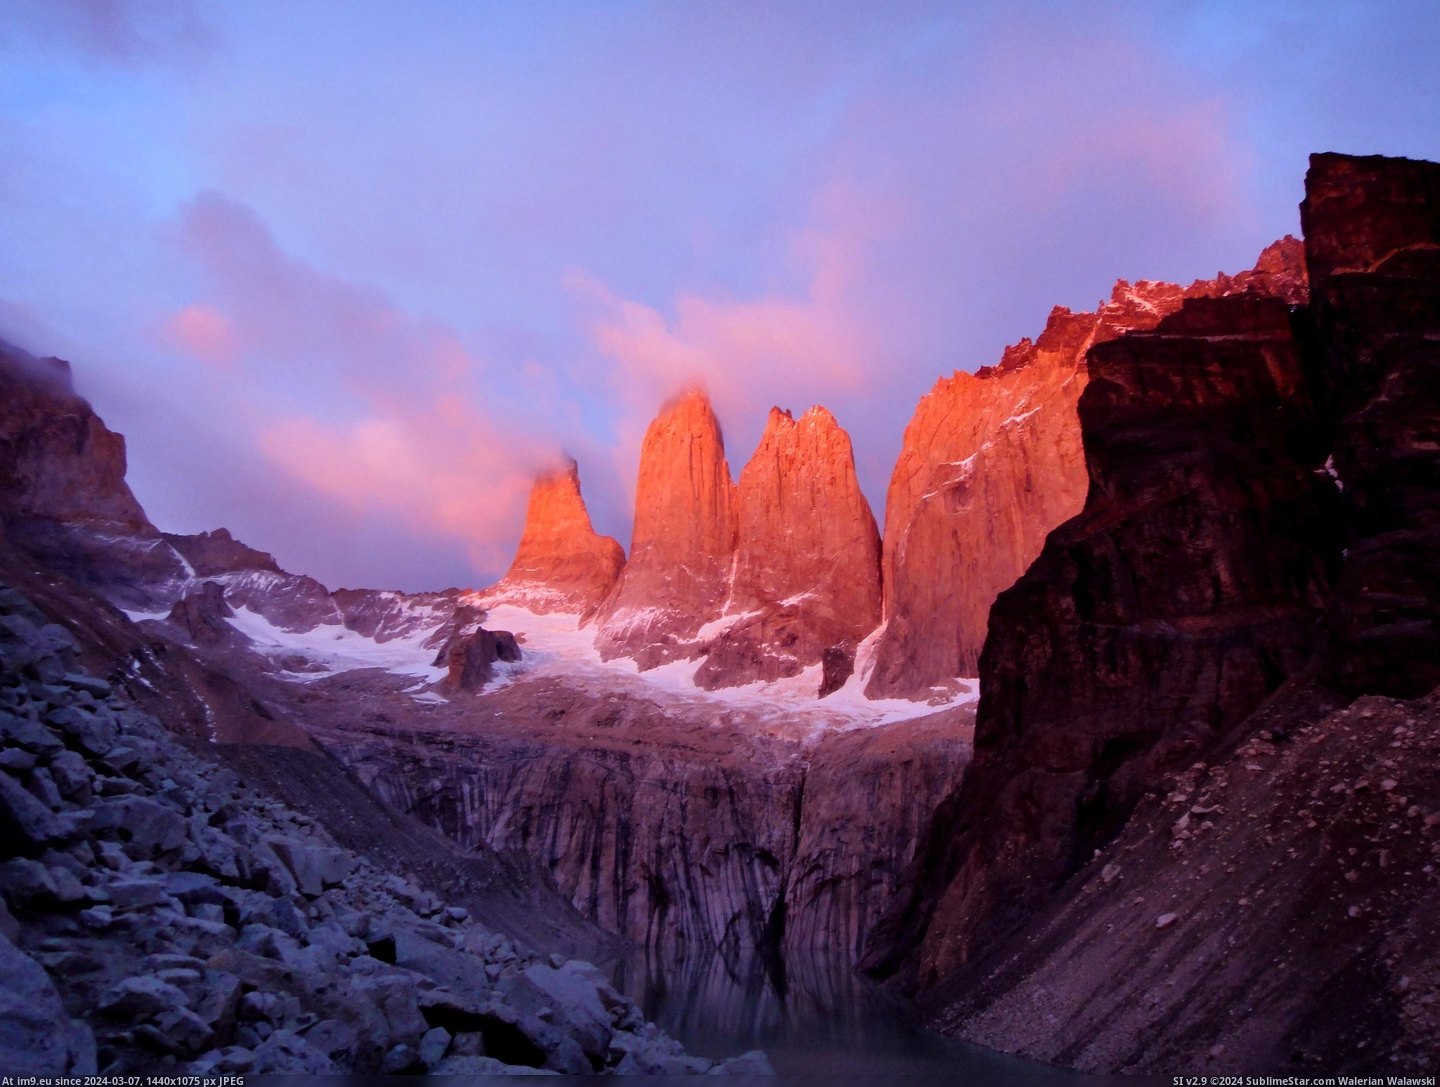 #Did #Place #Point #Sunrise #Hitting #Torres #Paine #Justic #Shoot #Famous #Del #Patagonia [Earthporn] Sunrise hitting the famous Torres del Paine in Patagonia. Not sure my little point & shoot did this place justic Pic. (Изображение из альбом My r/EARTHPORN favs))